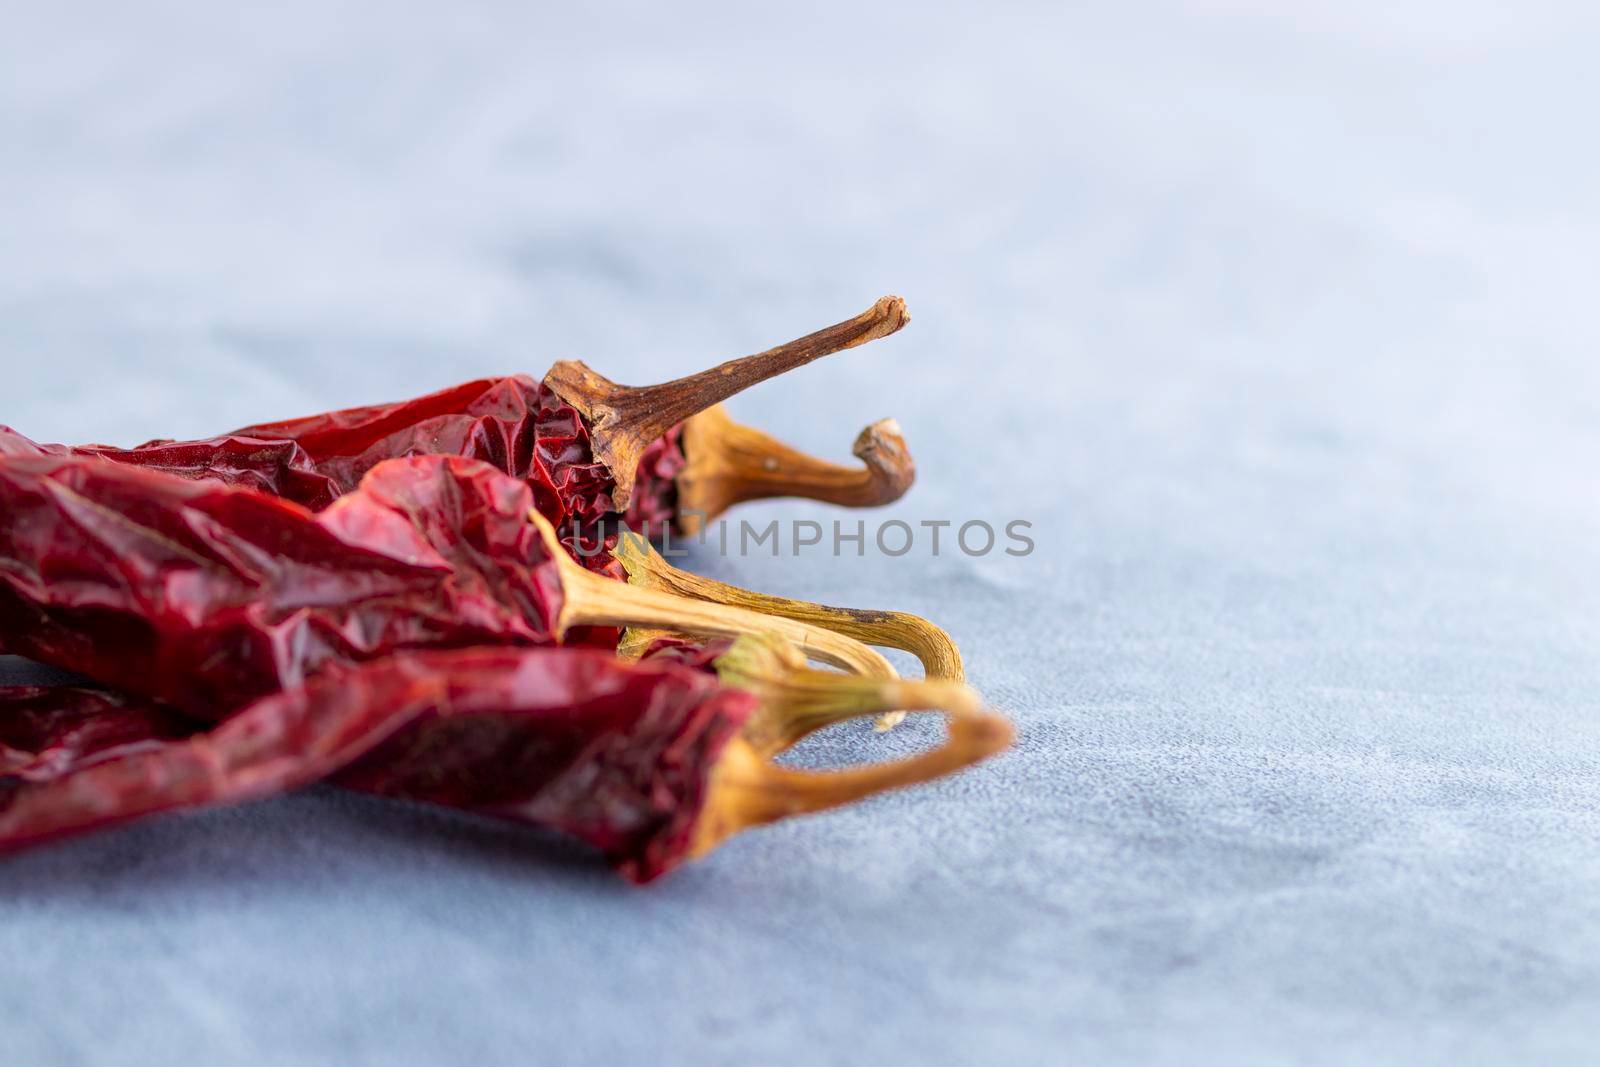 View of dehydrated bell pepper, used as an ingredient in cooking by eagg13